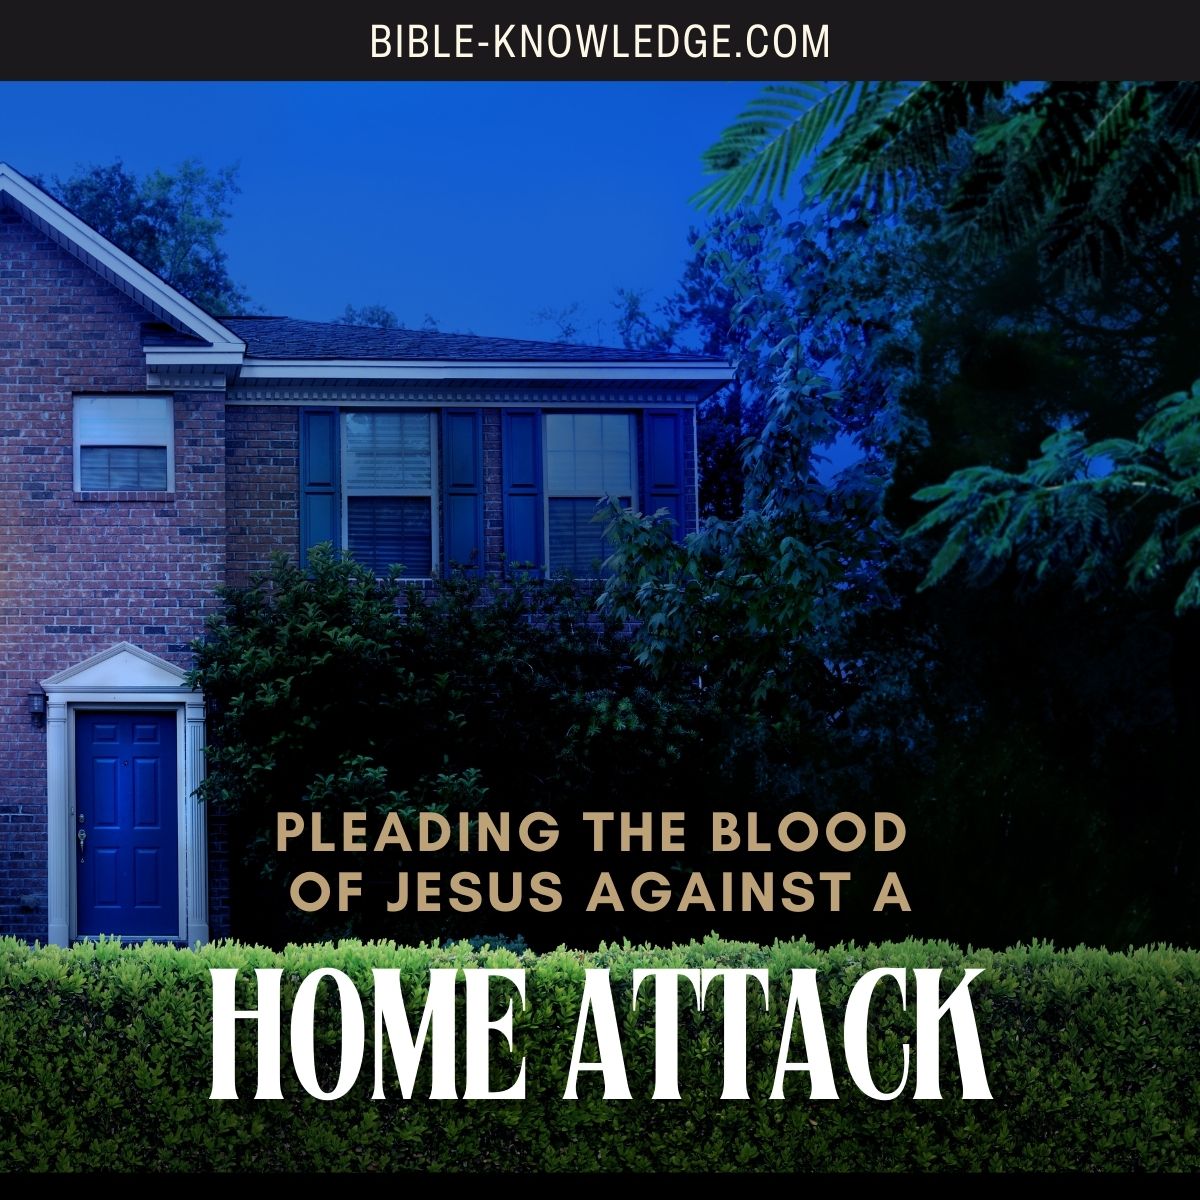 Pleading the Blood Against a Home Attack